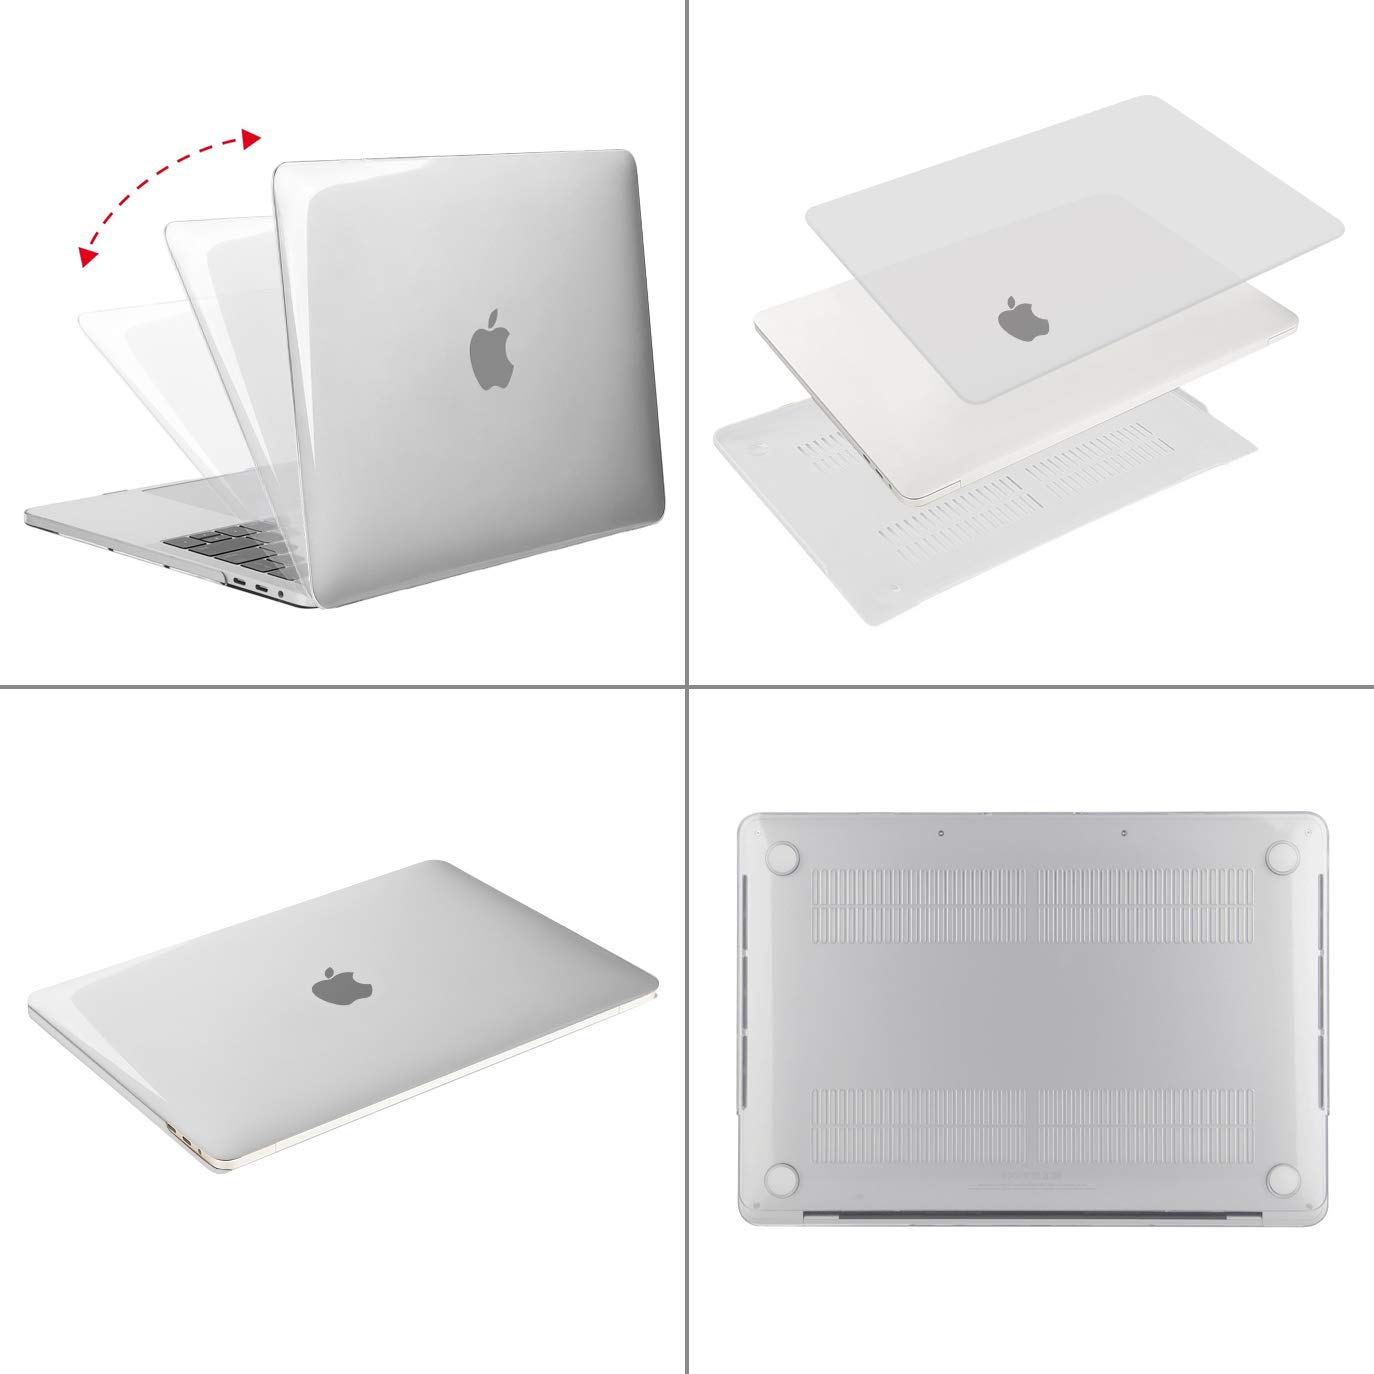 HF-MBP15-CSC: MacBook Pro 15 Case 2019 2018 2017 2016 Release A1990 / A1707 with Touch Bar & Touch ID, Plastic Hard Case Shell Cover Compatible with MacBook Pro 15 Inch, Clear